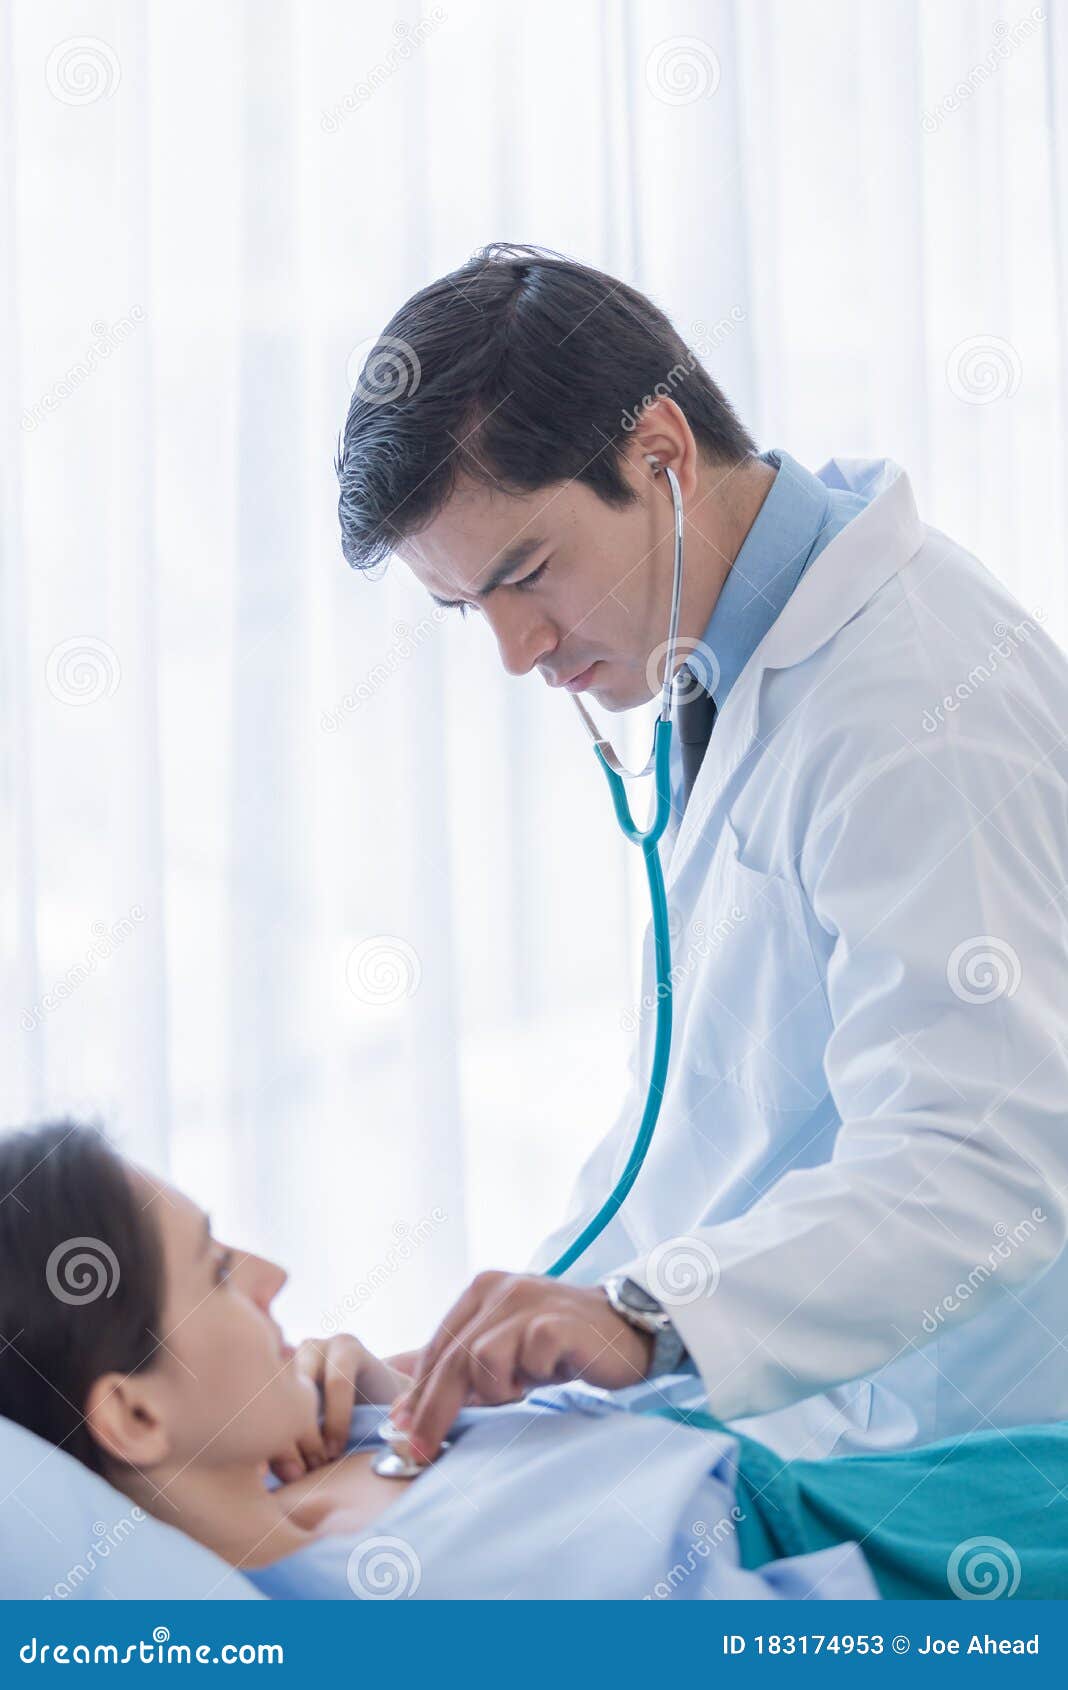 A Doctor Take Care Of Sick Patient Woman At The Hospital Or Medical Clinic Stock Image Image